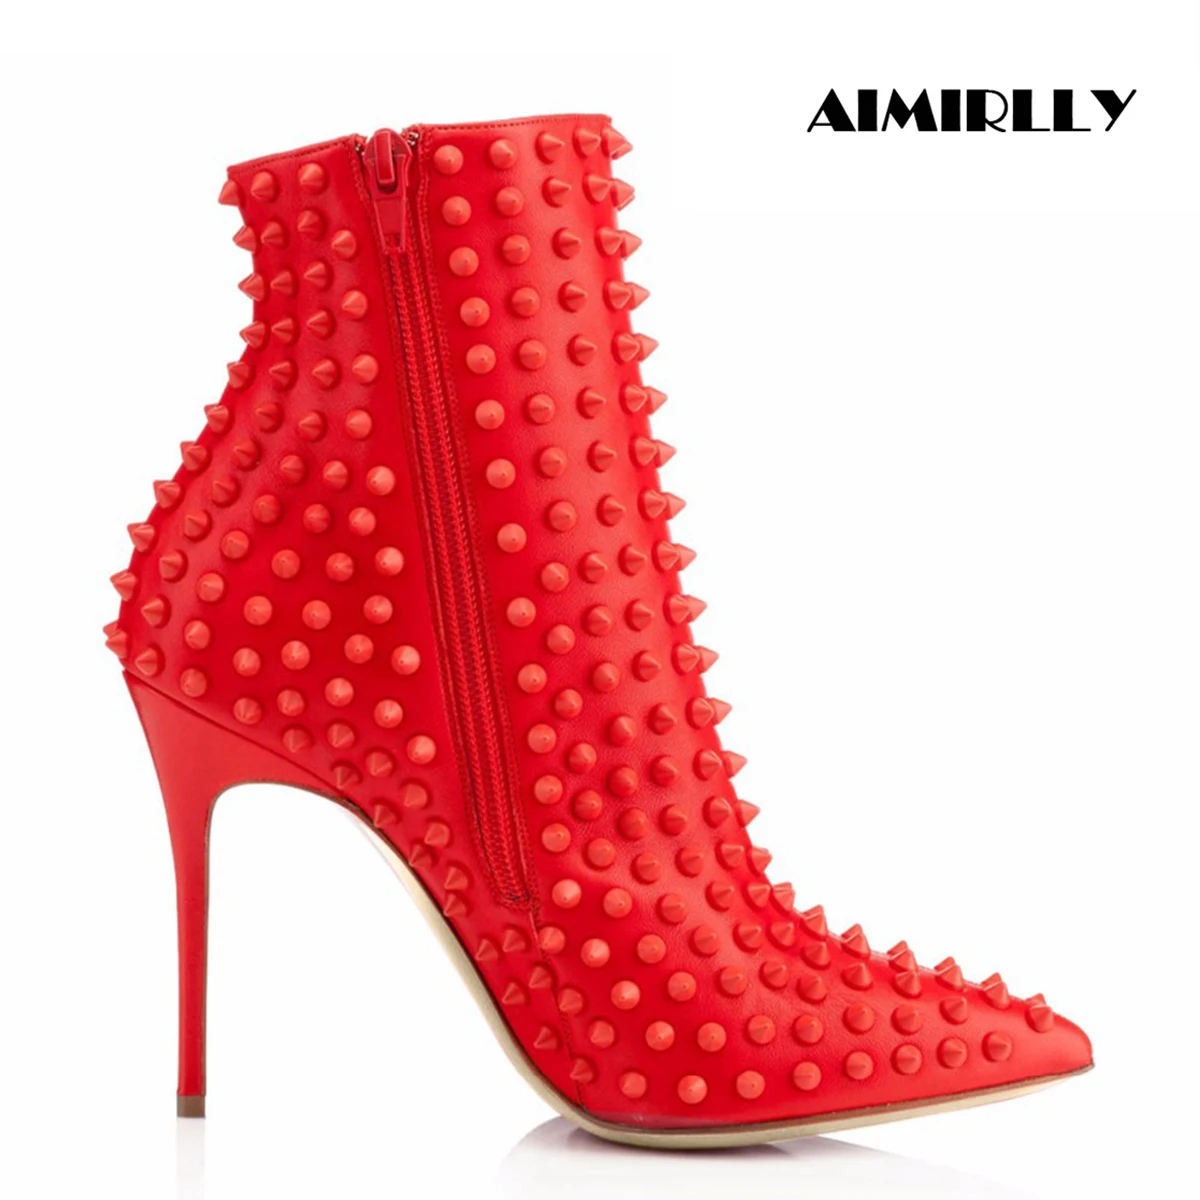 

Fashion Women's Shoes Pointed Toe High Heels Ankle Boots Spikes Booties Ladies Autumn Winter Outfit Footwear Black Red